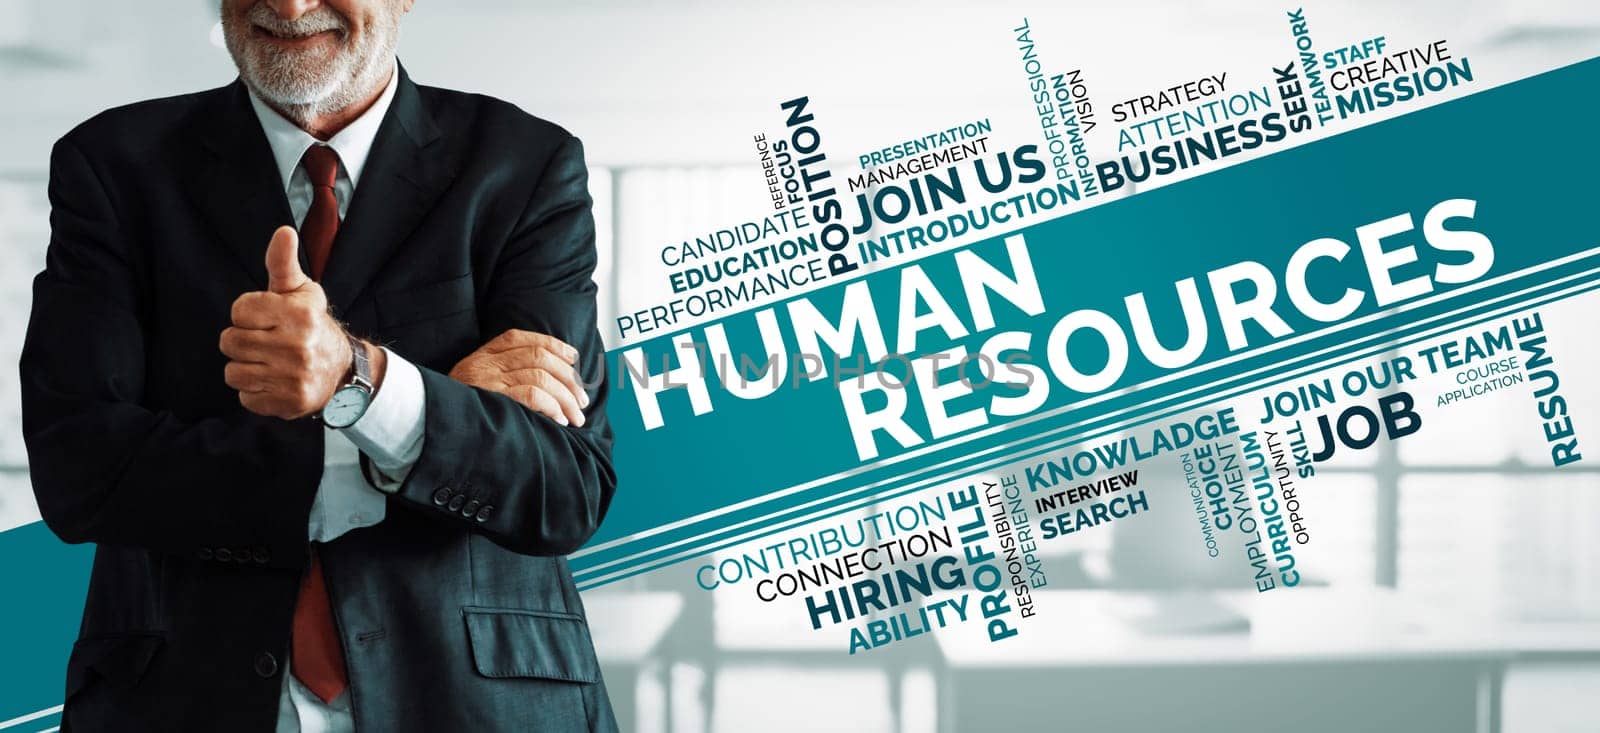 Human Resources and People Networking Concept uds by biancoblue